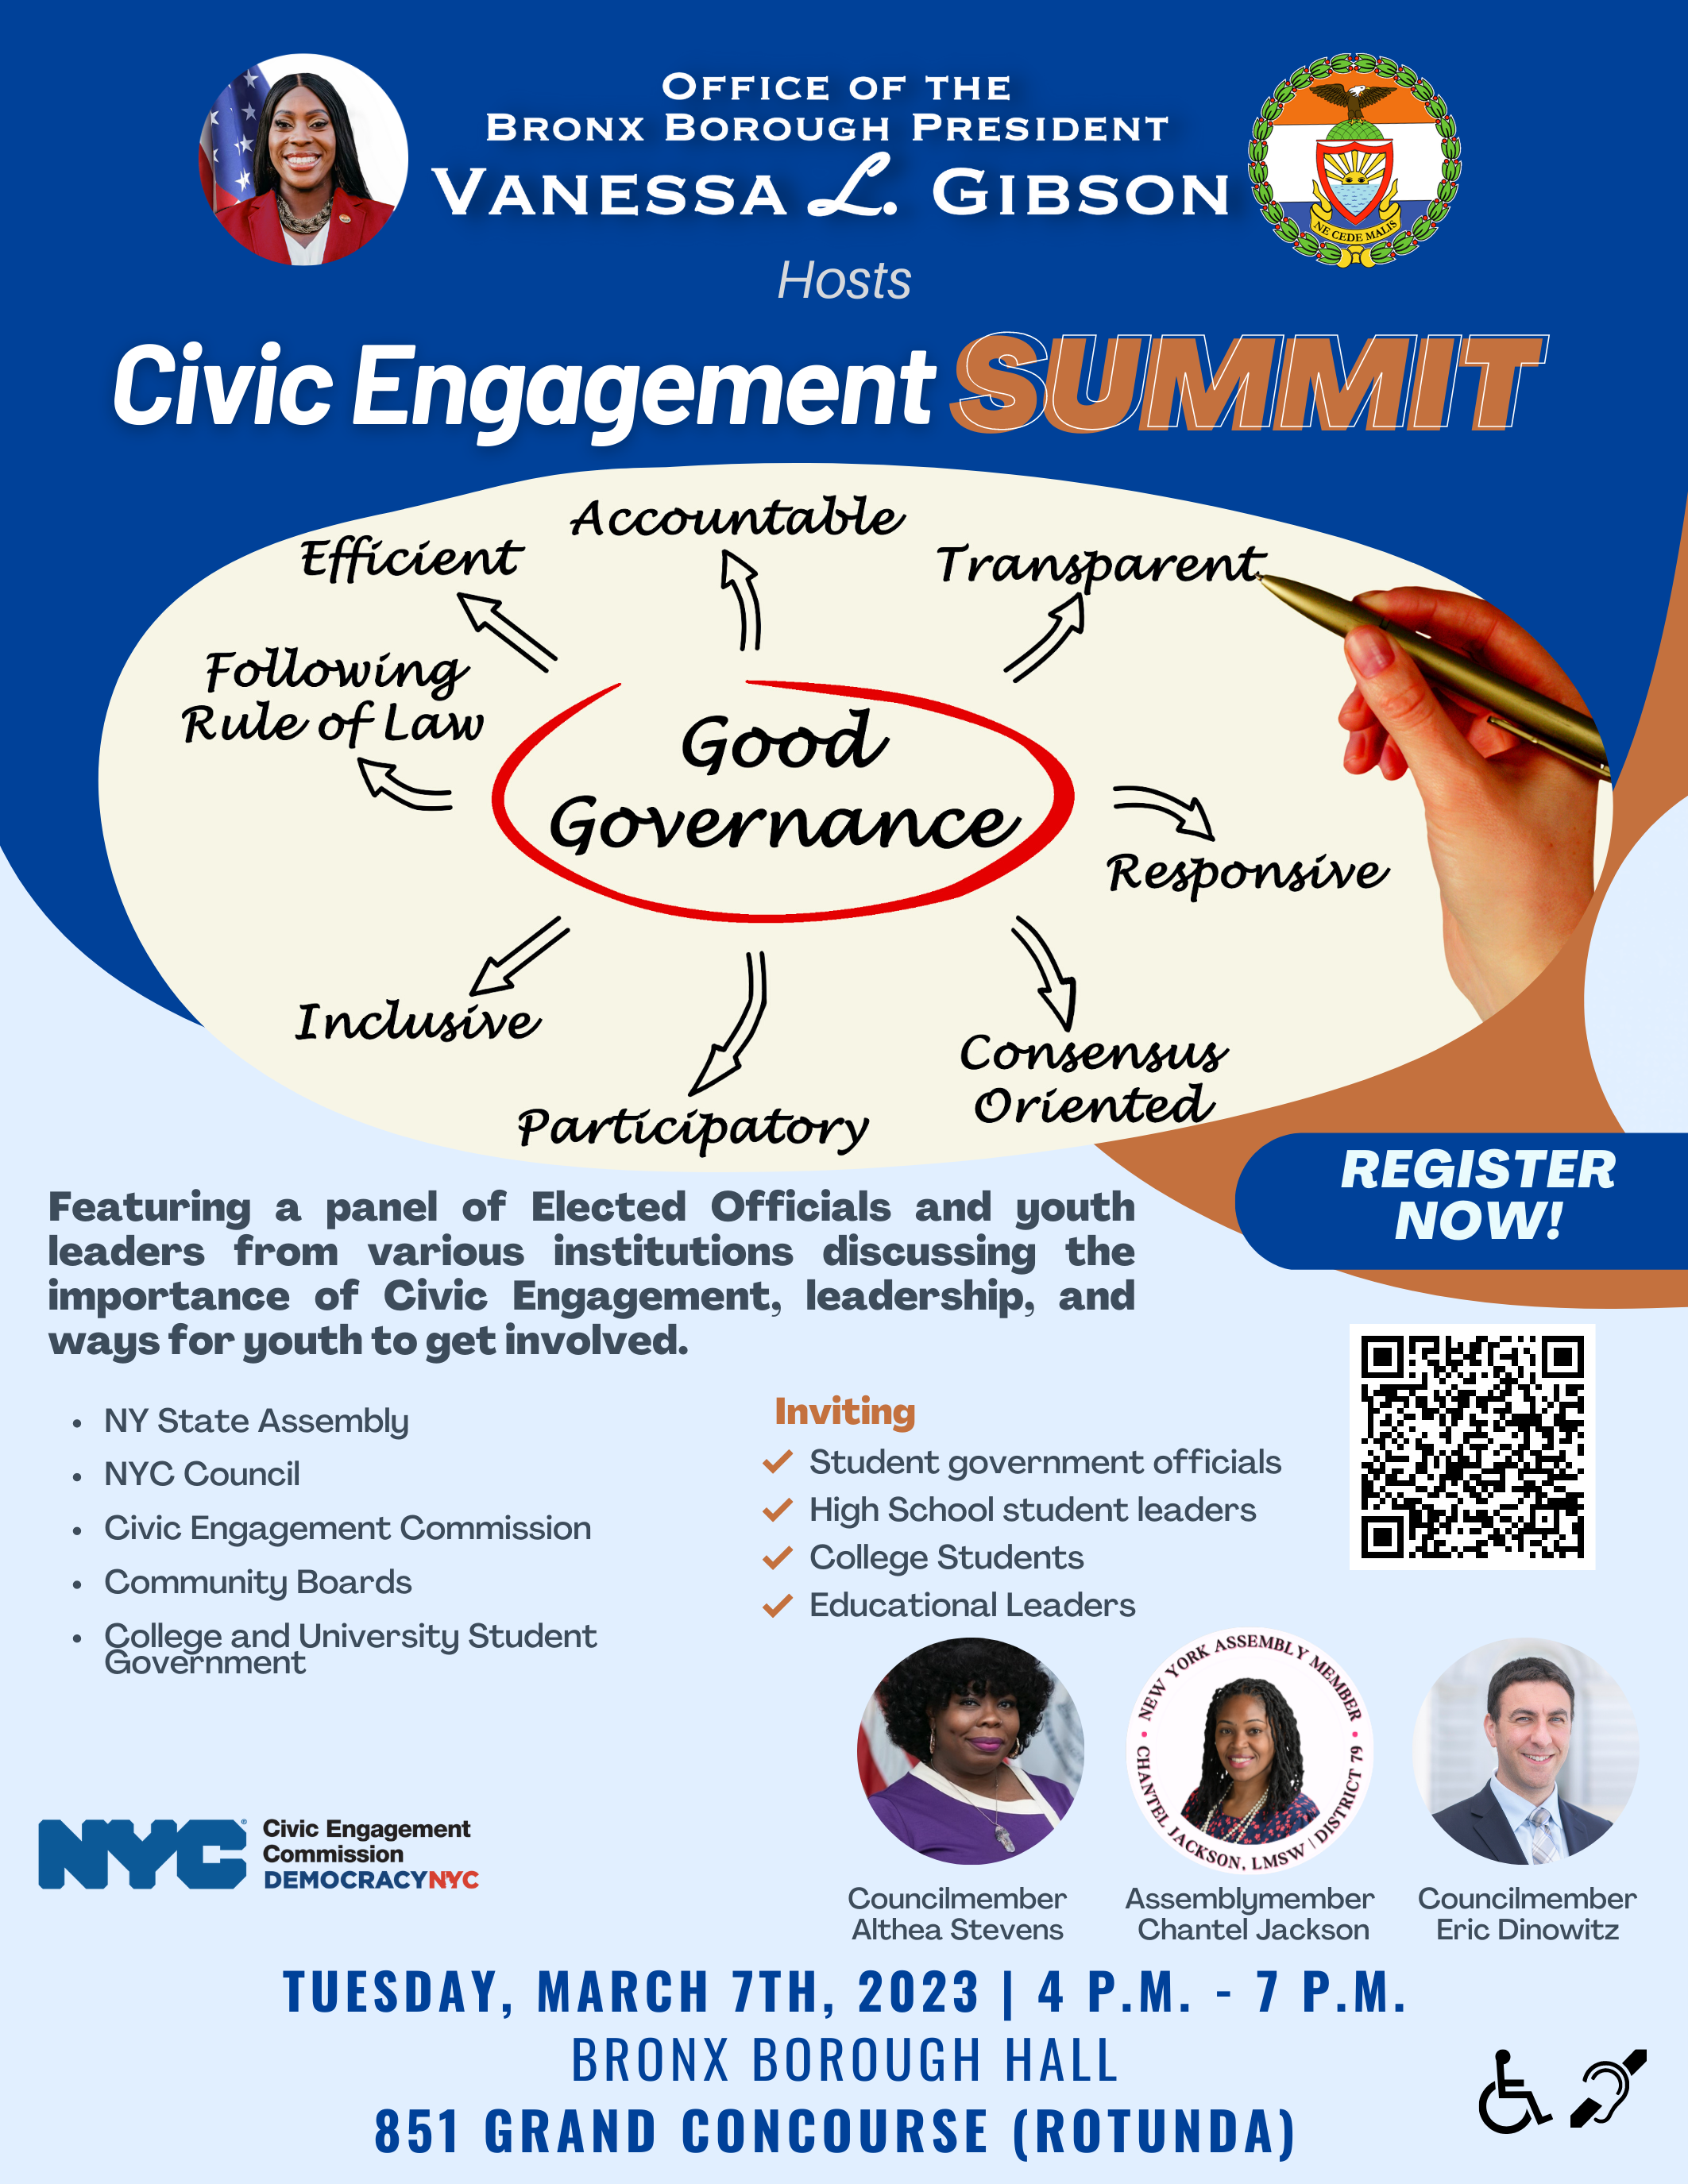 Flyer for a Civic Engagement Summit on March 7, 2023 - call 718-590-3500 for more information